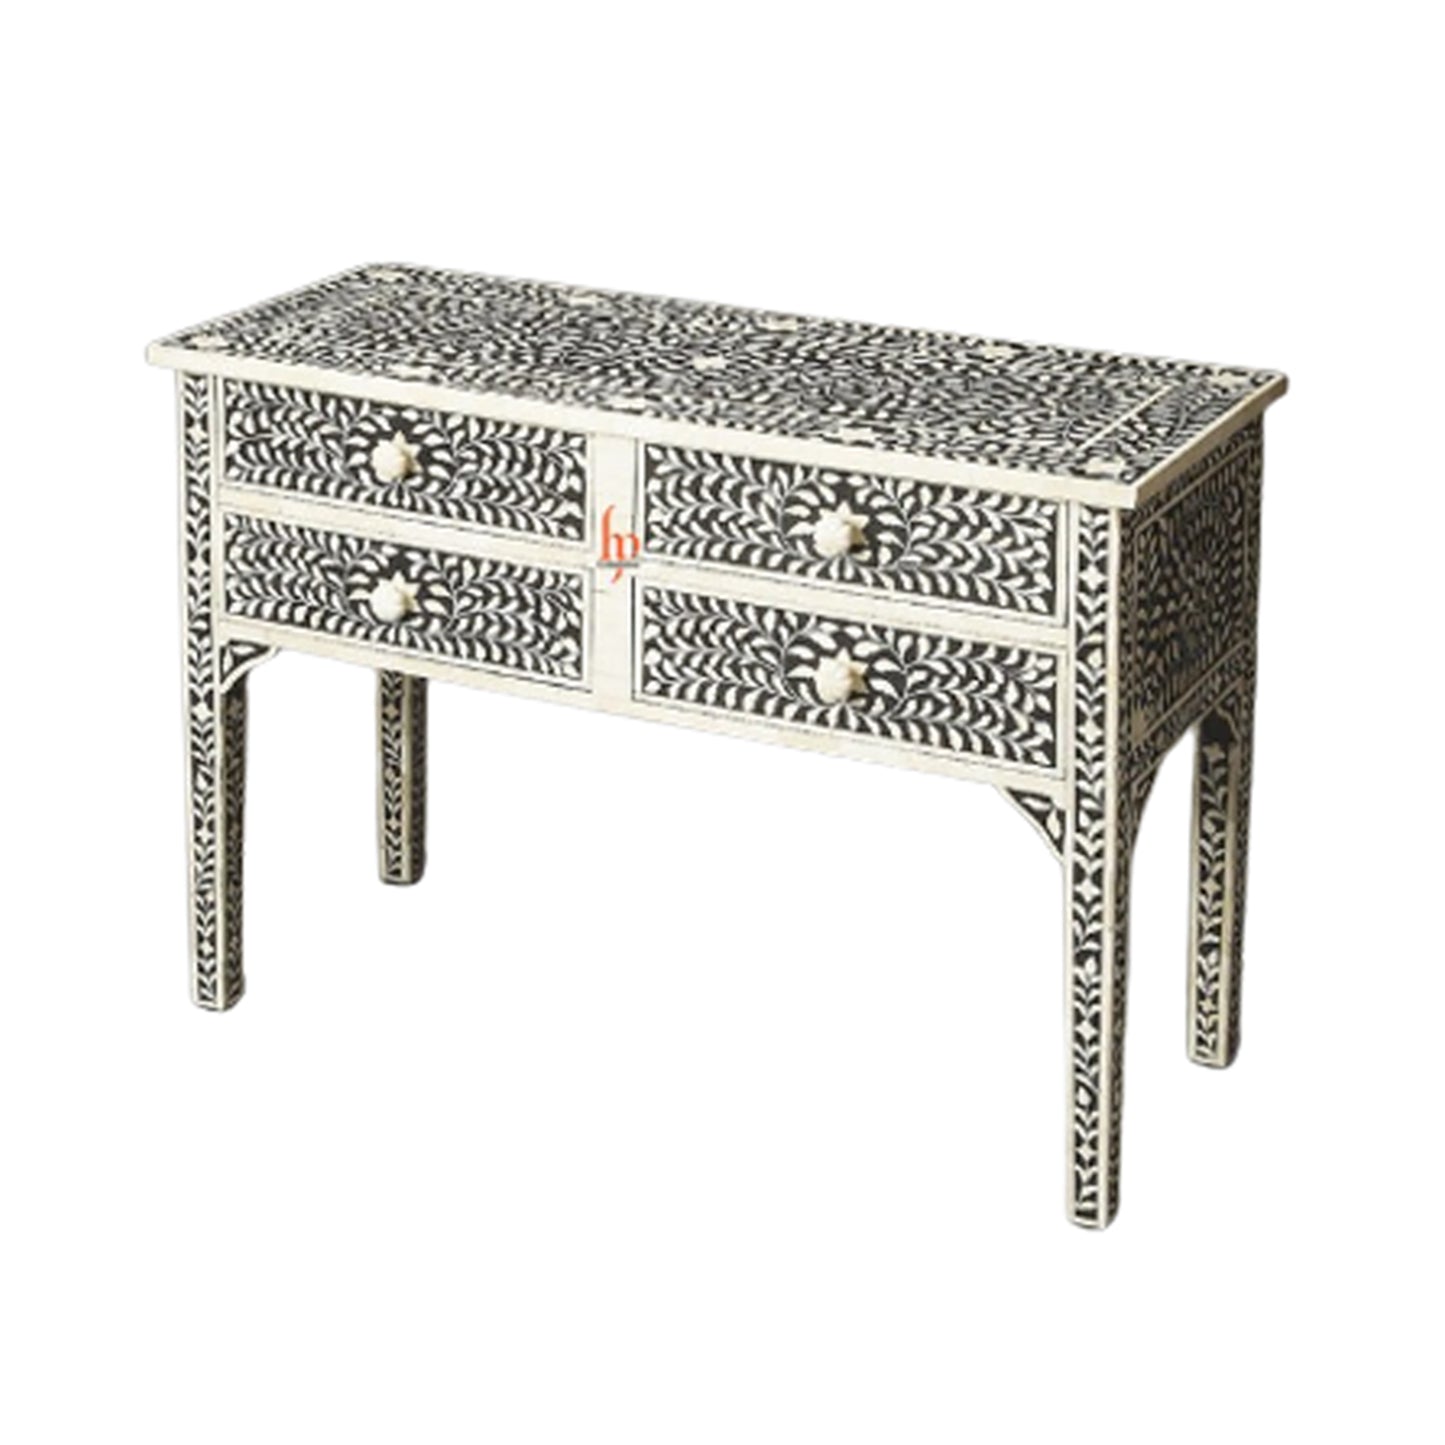 Handmade Bone Inlay Console with 4 Drawer Beautiful Floral Design Pretty Home Decor Console Beautiful Entrance Table